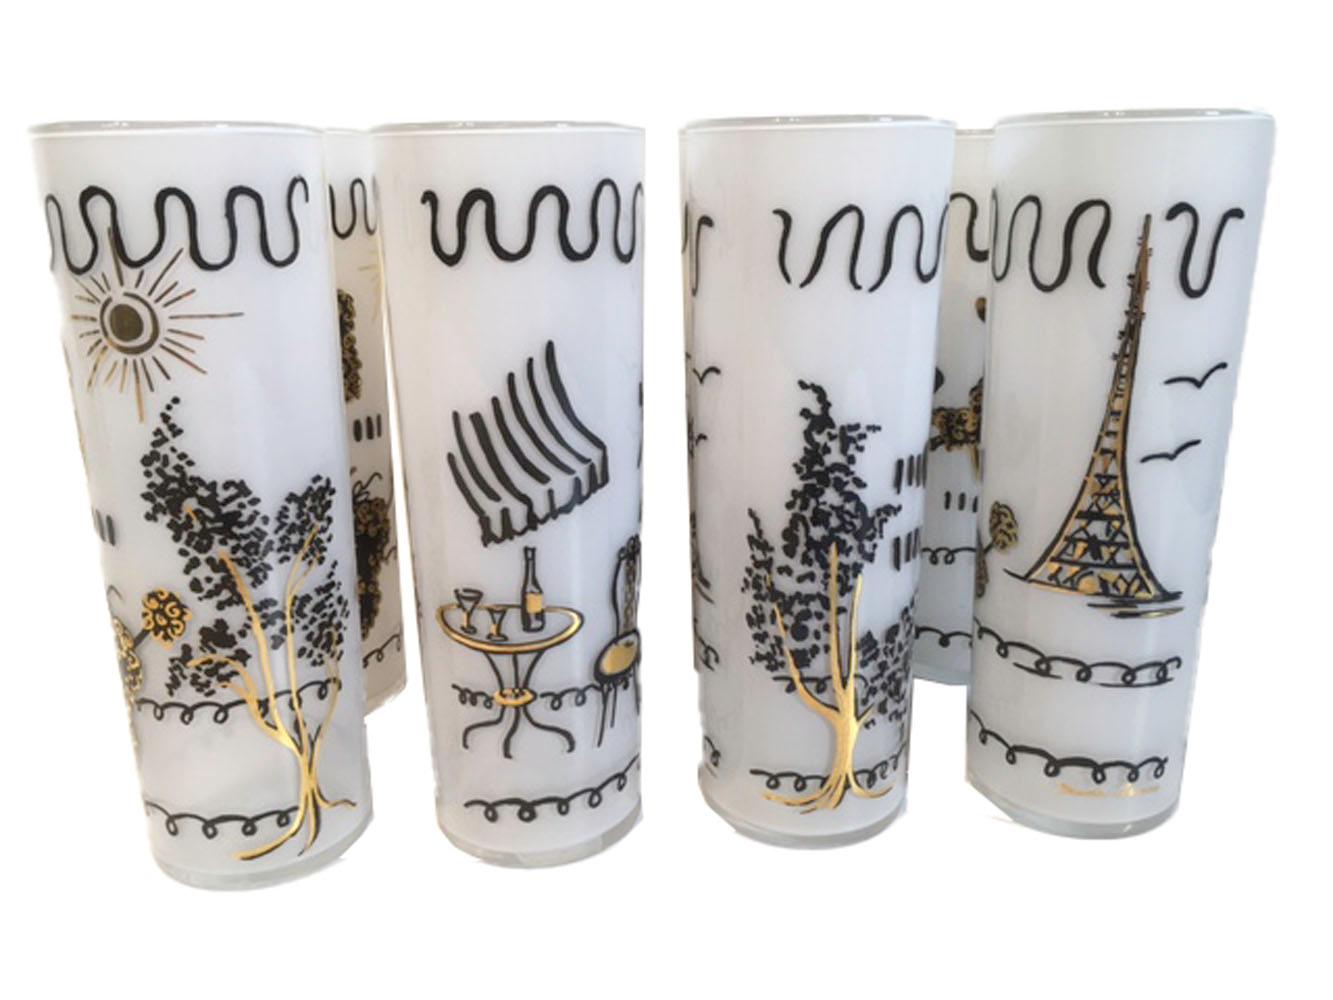 Set of 8 (4 pairs) of vintage Tom Collins glasses, designed by Maida Amour on Libbey glass. Each glass has a French poodle walking on their hind legs. The glass is frosted white on the interior, the exteriors are decorated in black and gold with